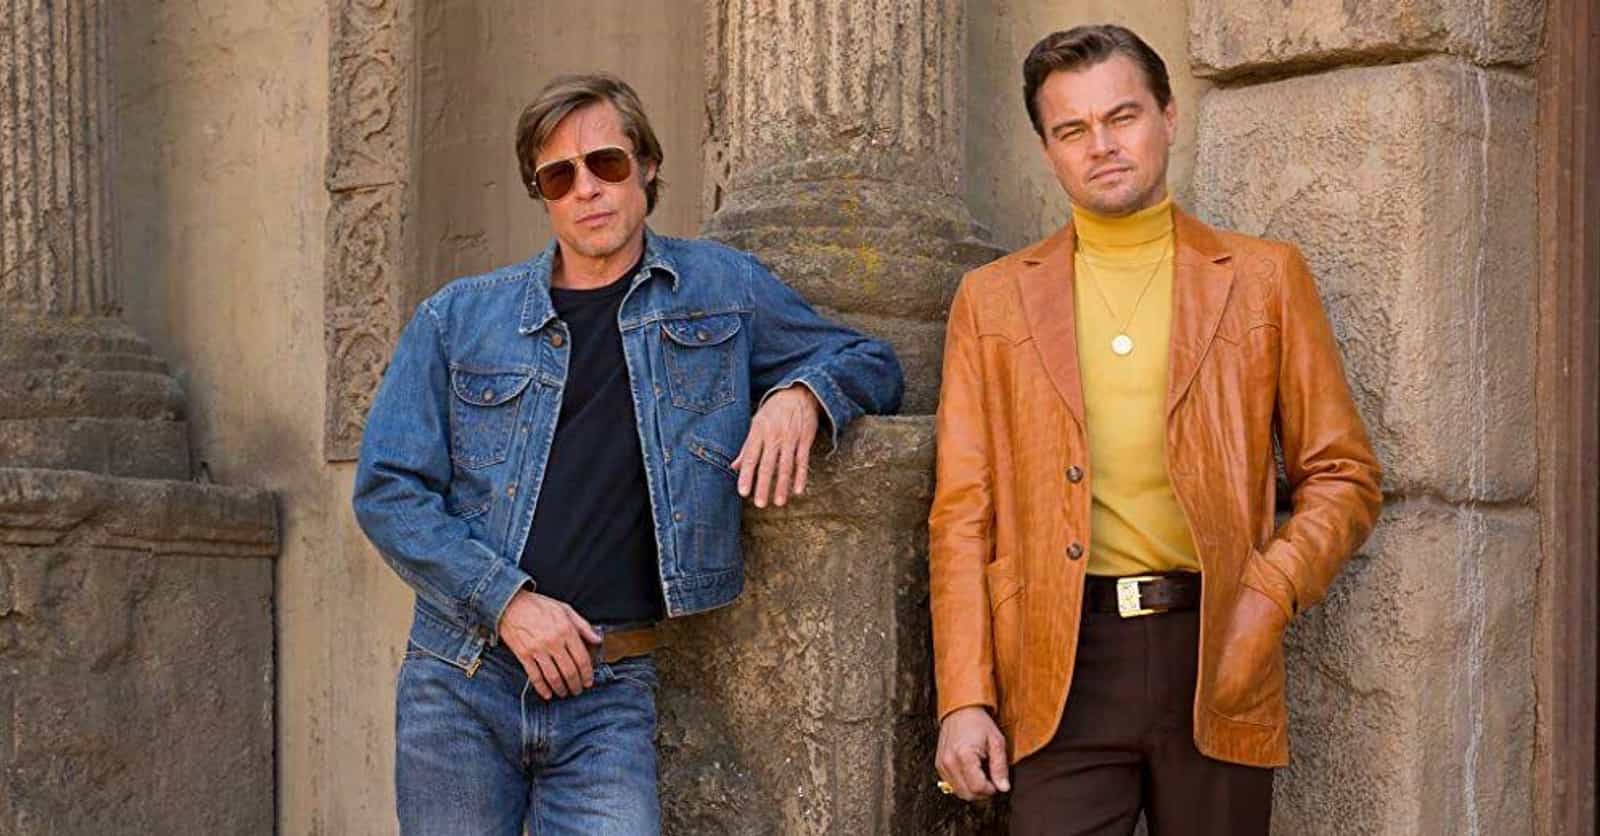 The History Behind Tarantino's 'Once Upon A Time In Hollywood'